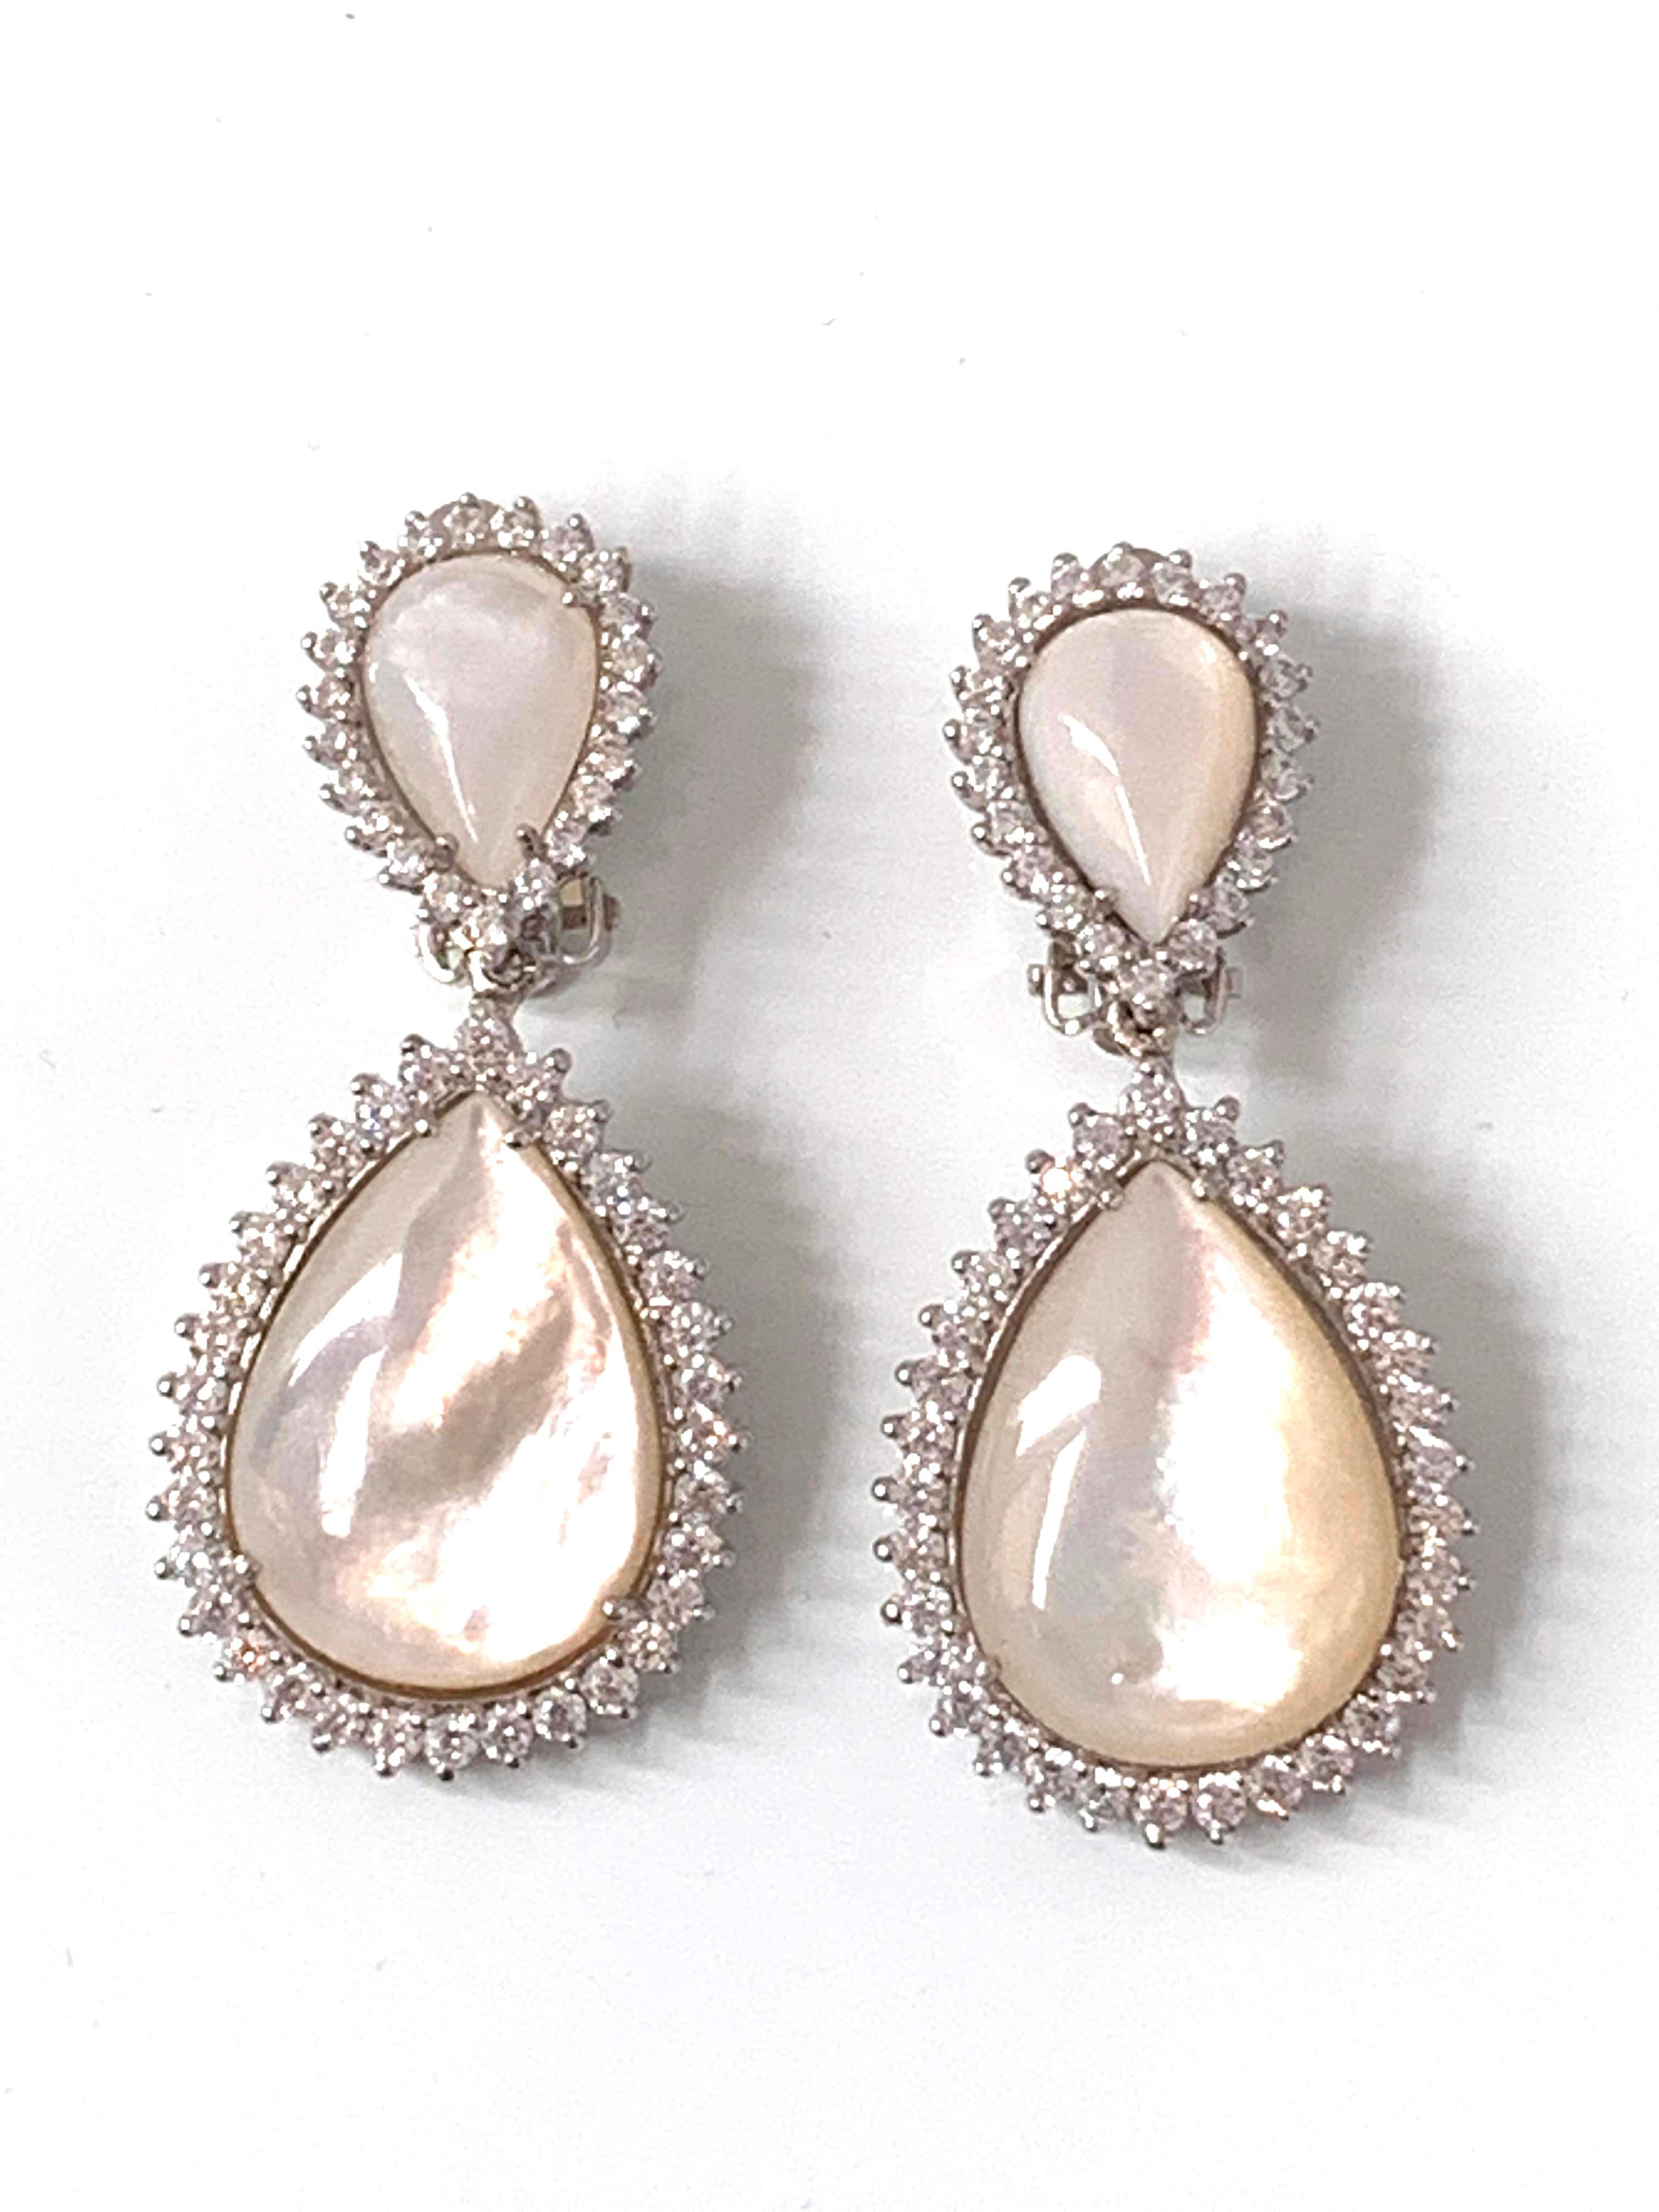 Double pear shape mother of pearl Drop Earrings surrounded with faux diamond CZ. These earrings feature 4 beautiful iridescent cabochon-cut pear shape mother of pearls and over 100pc of round cubic zirconia, handset in platinum rhodium plated